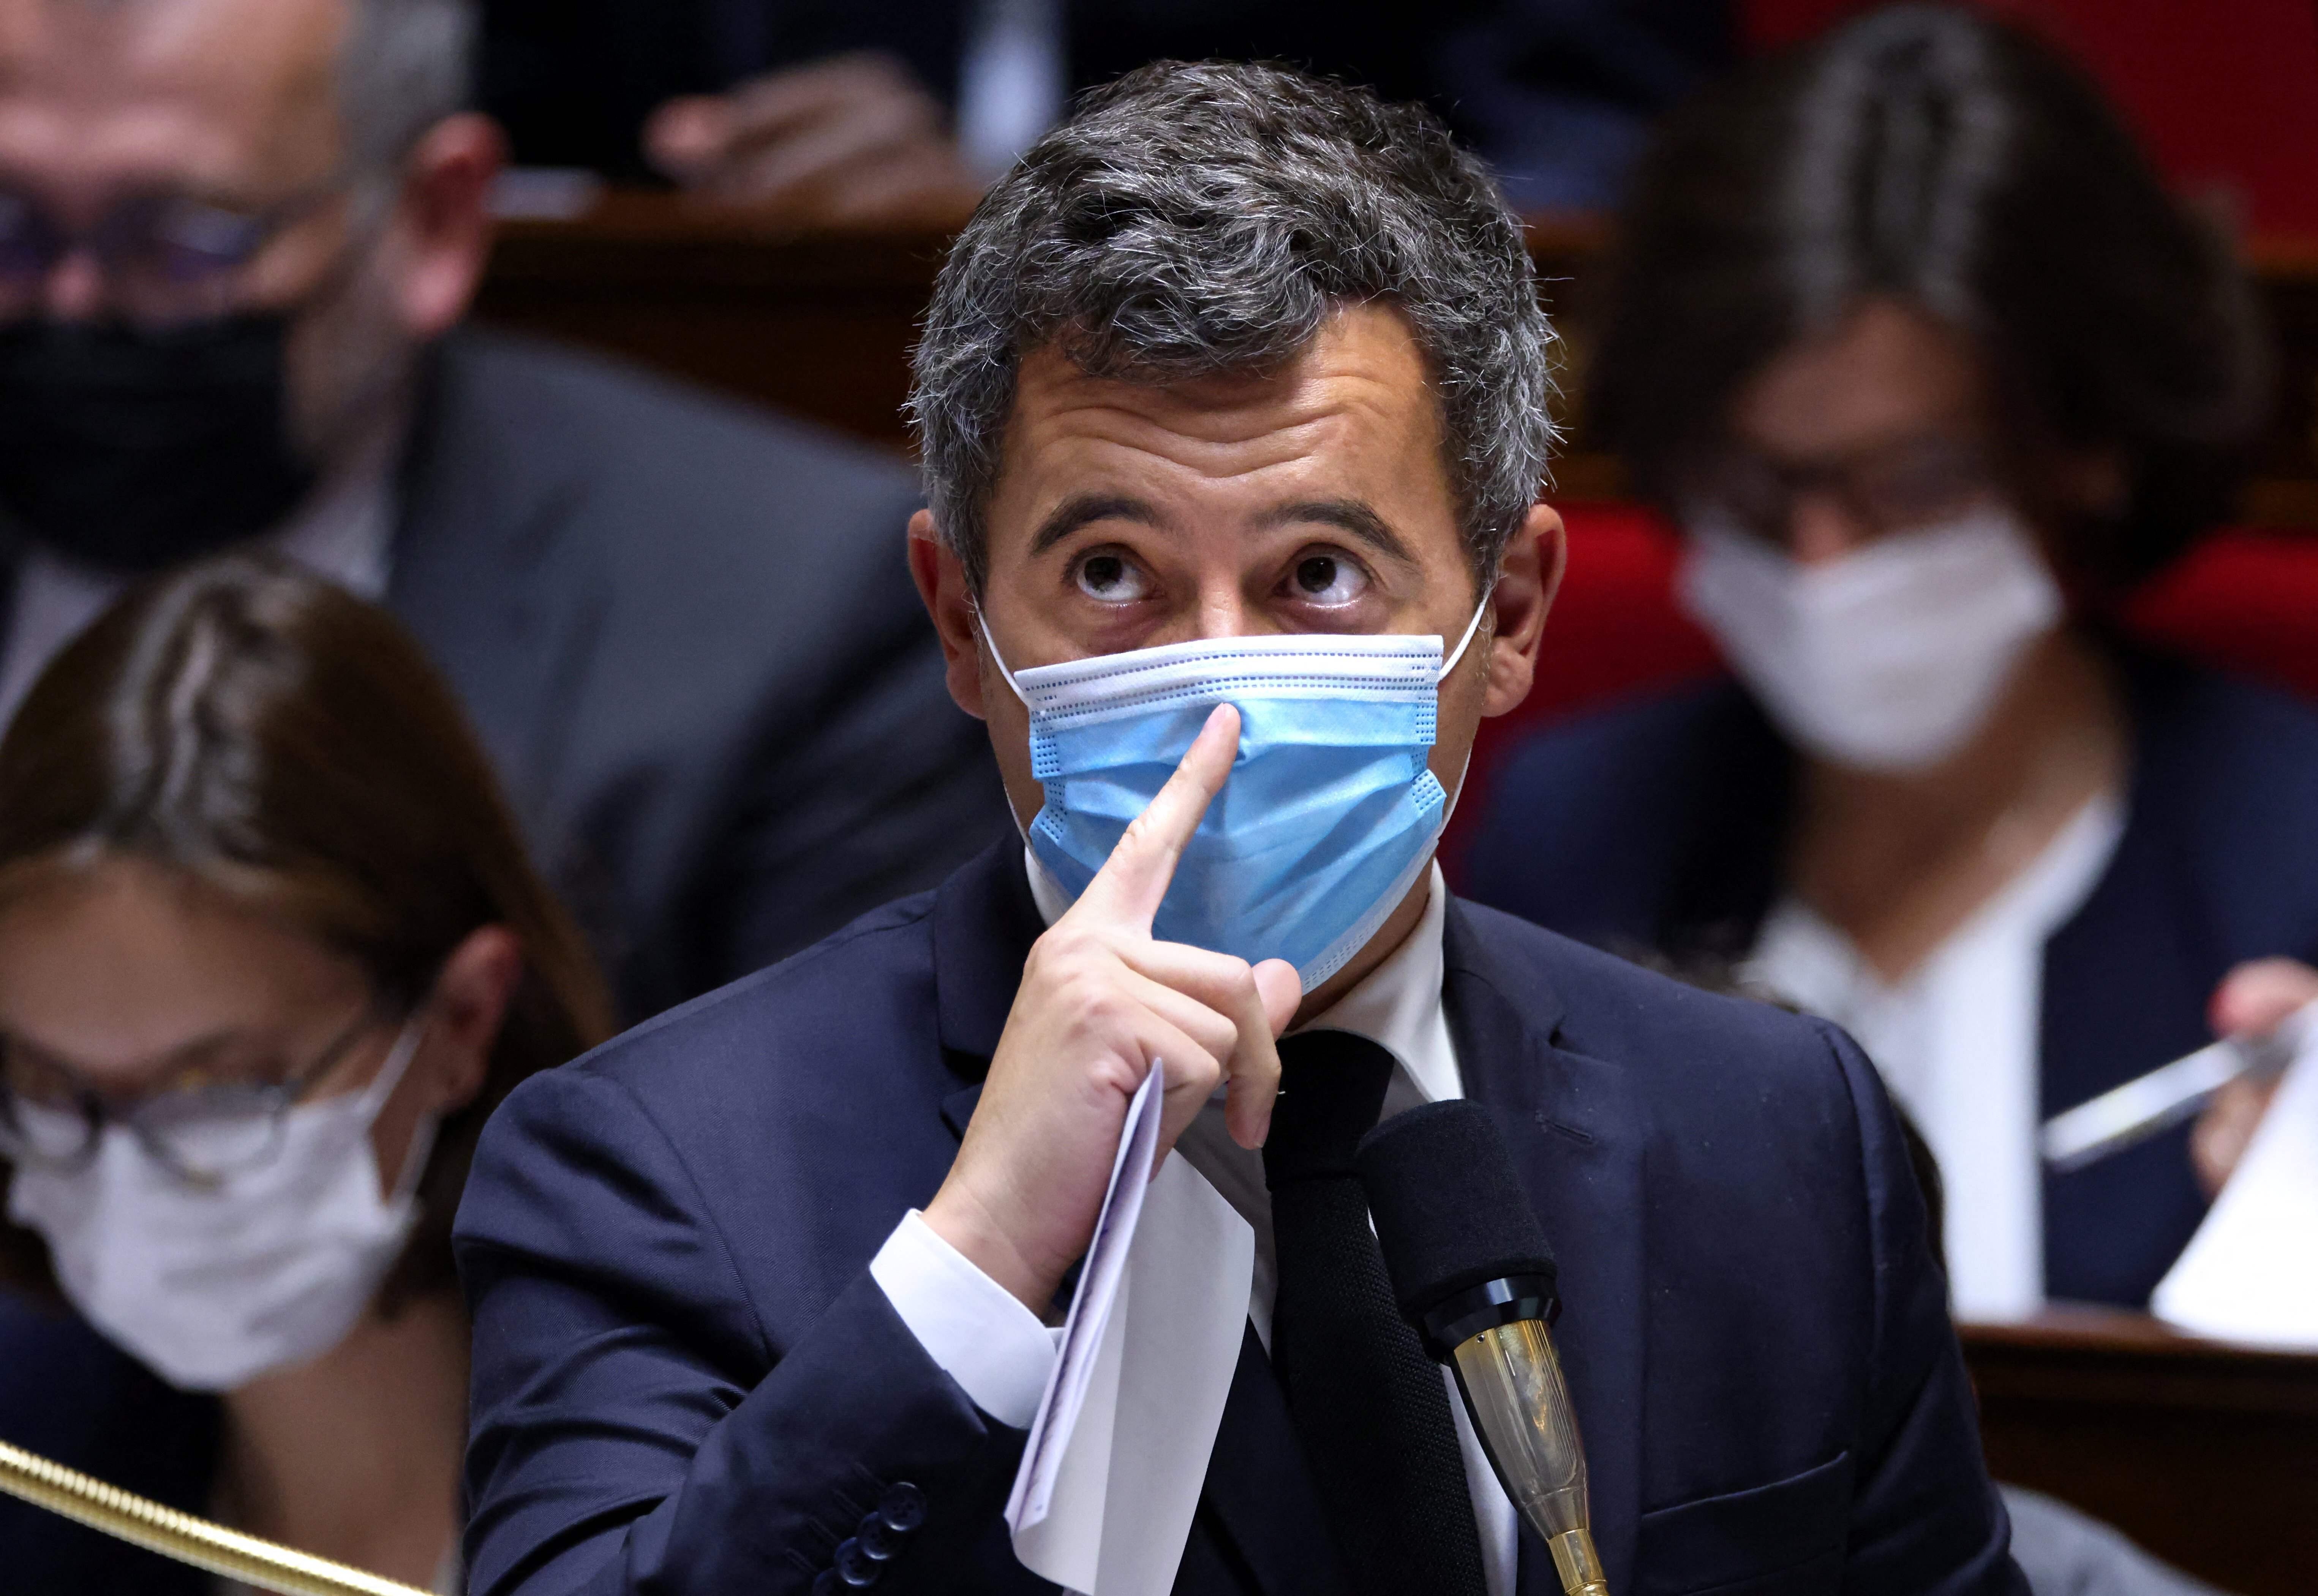 French Interior minister Gerald Darmanin at the French National Assembly in Paris on Tuesday. Photo: AFP